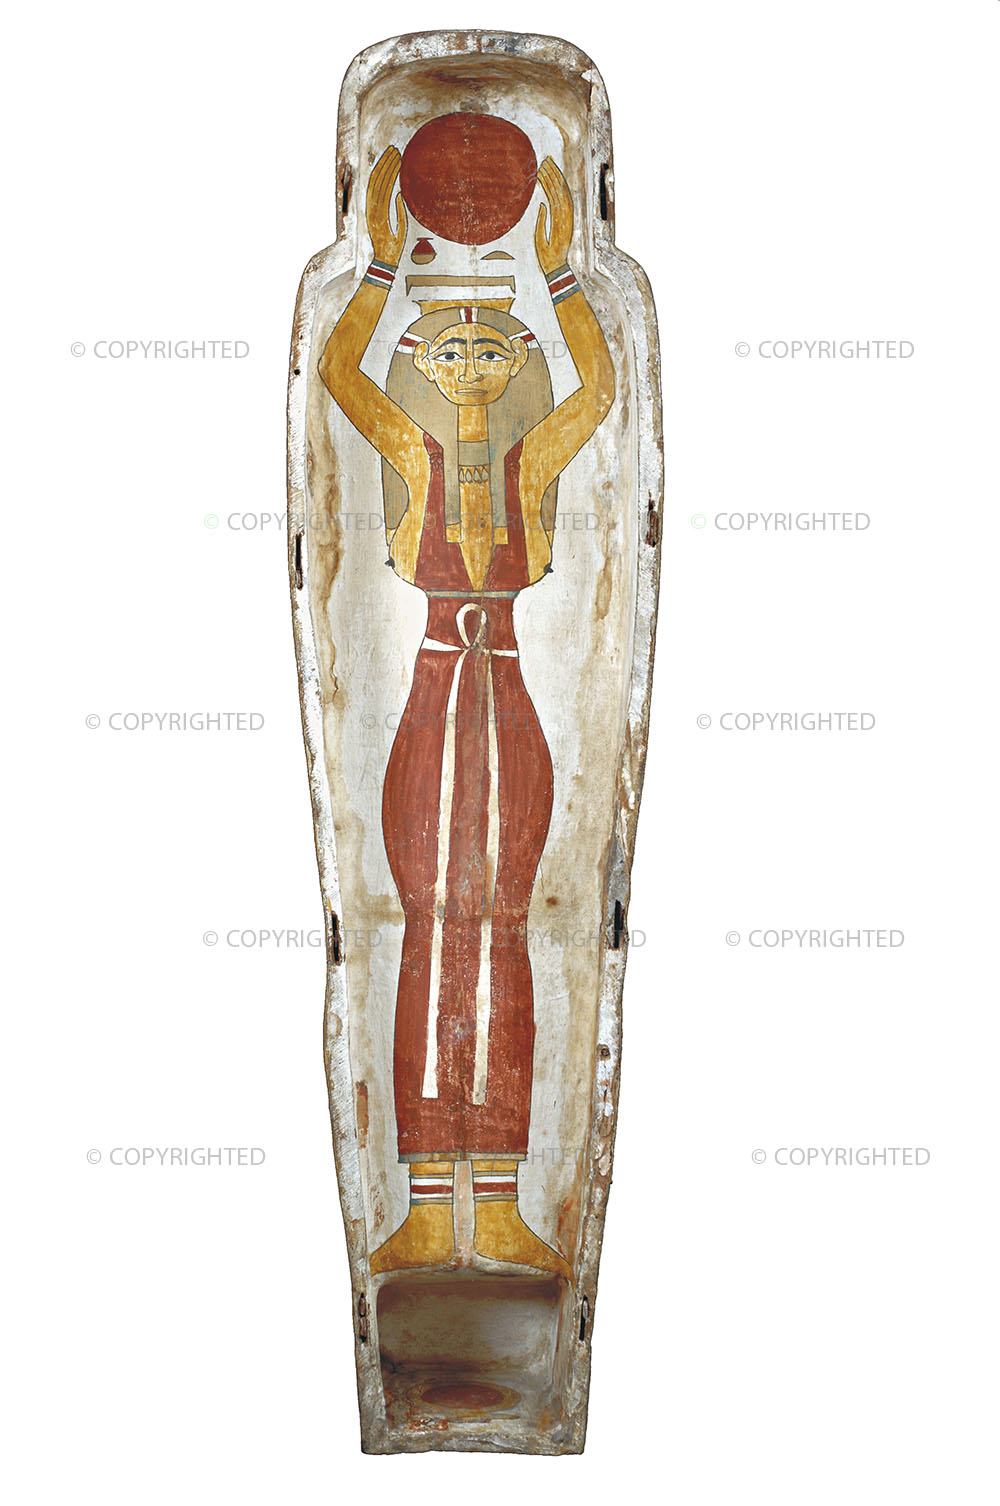 Sarcophagus lid portraying the goddess Nut